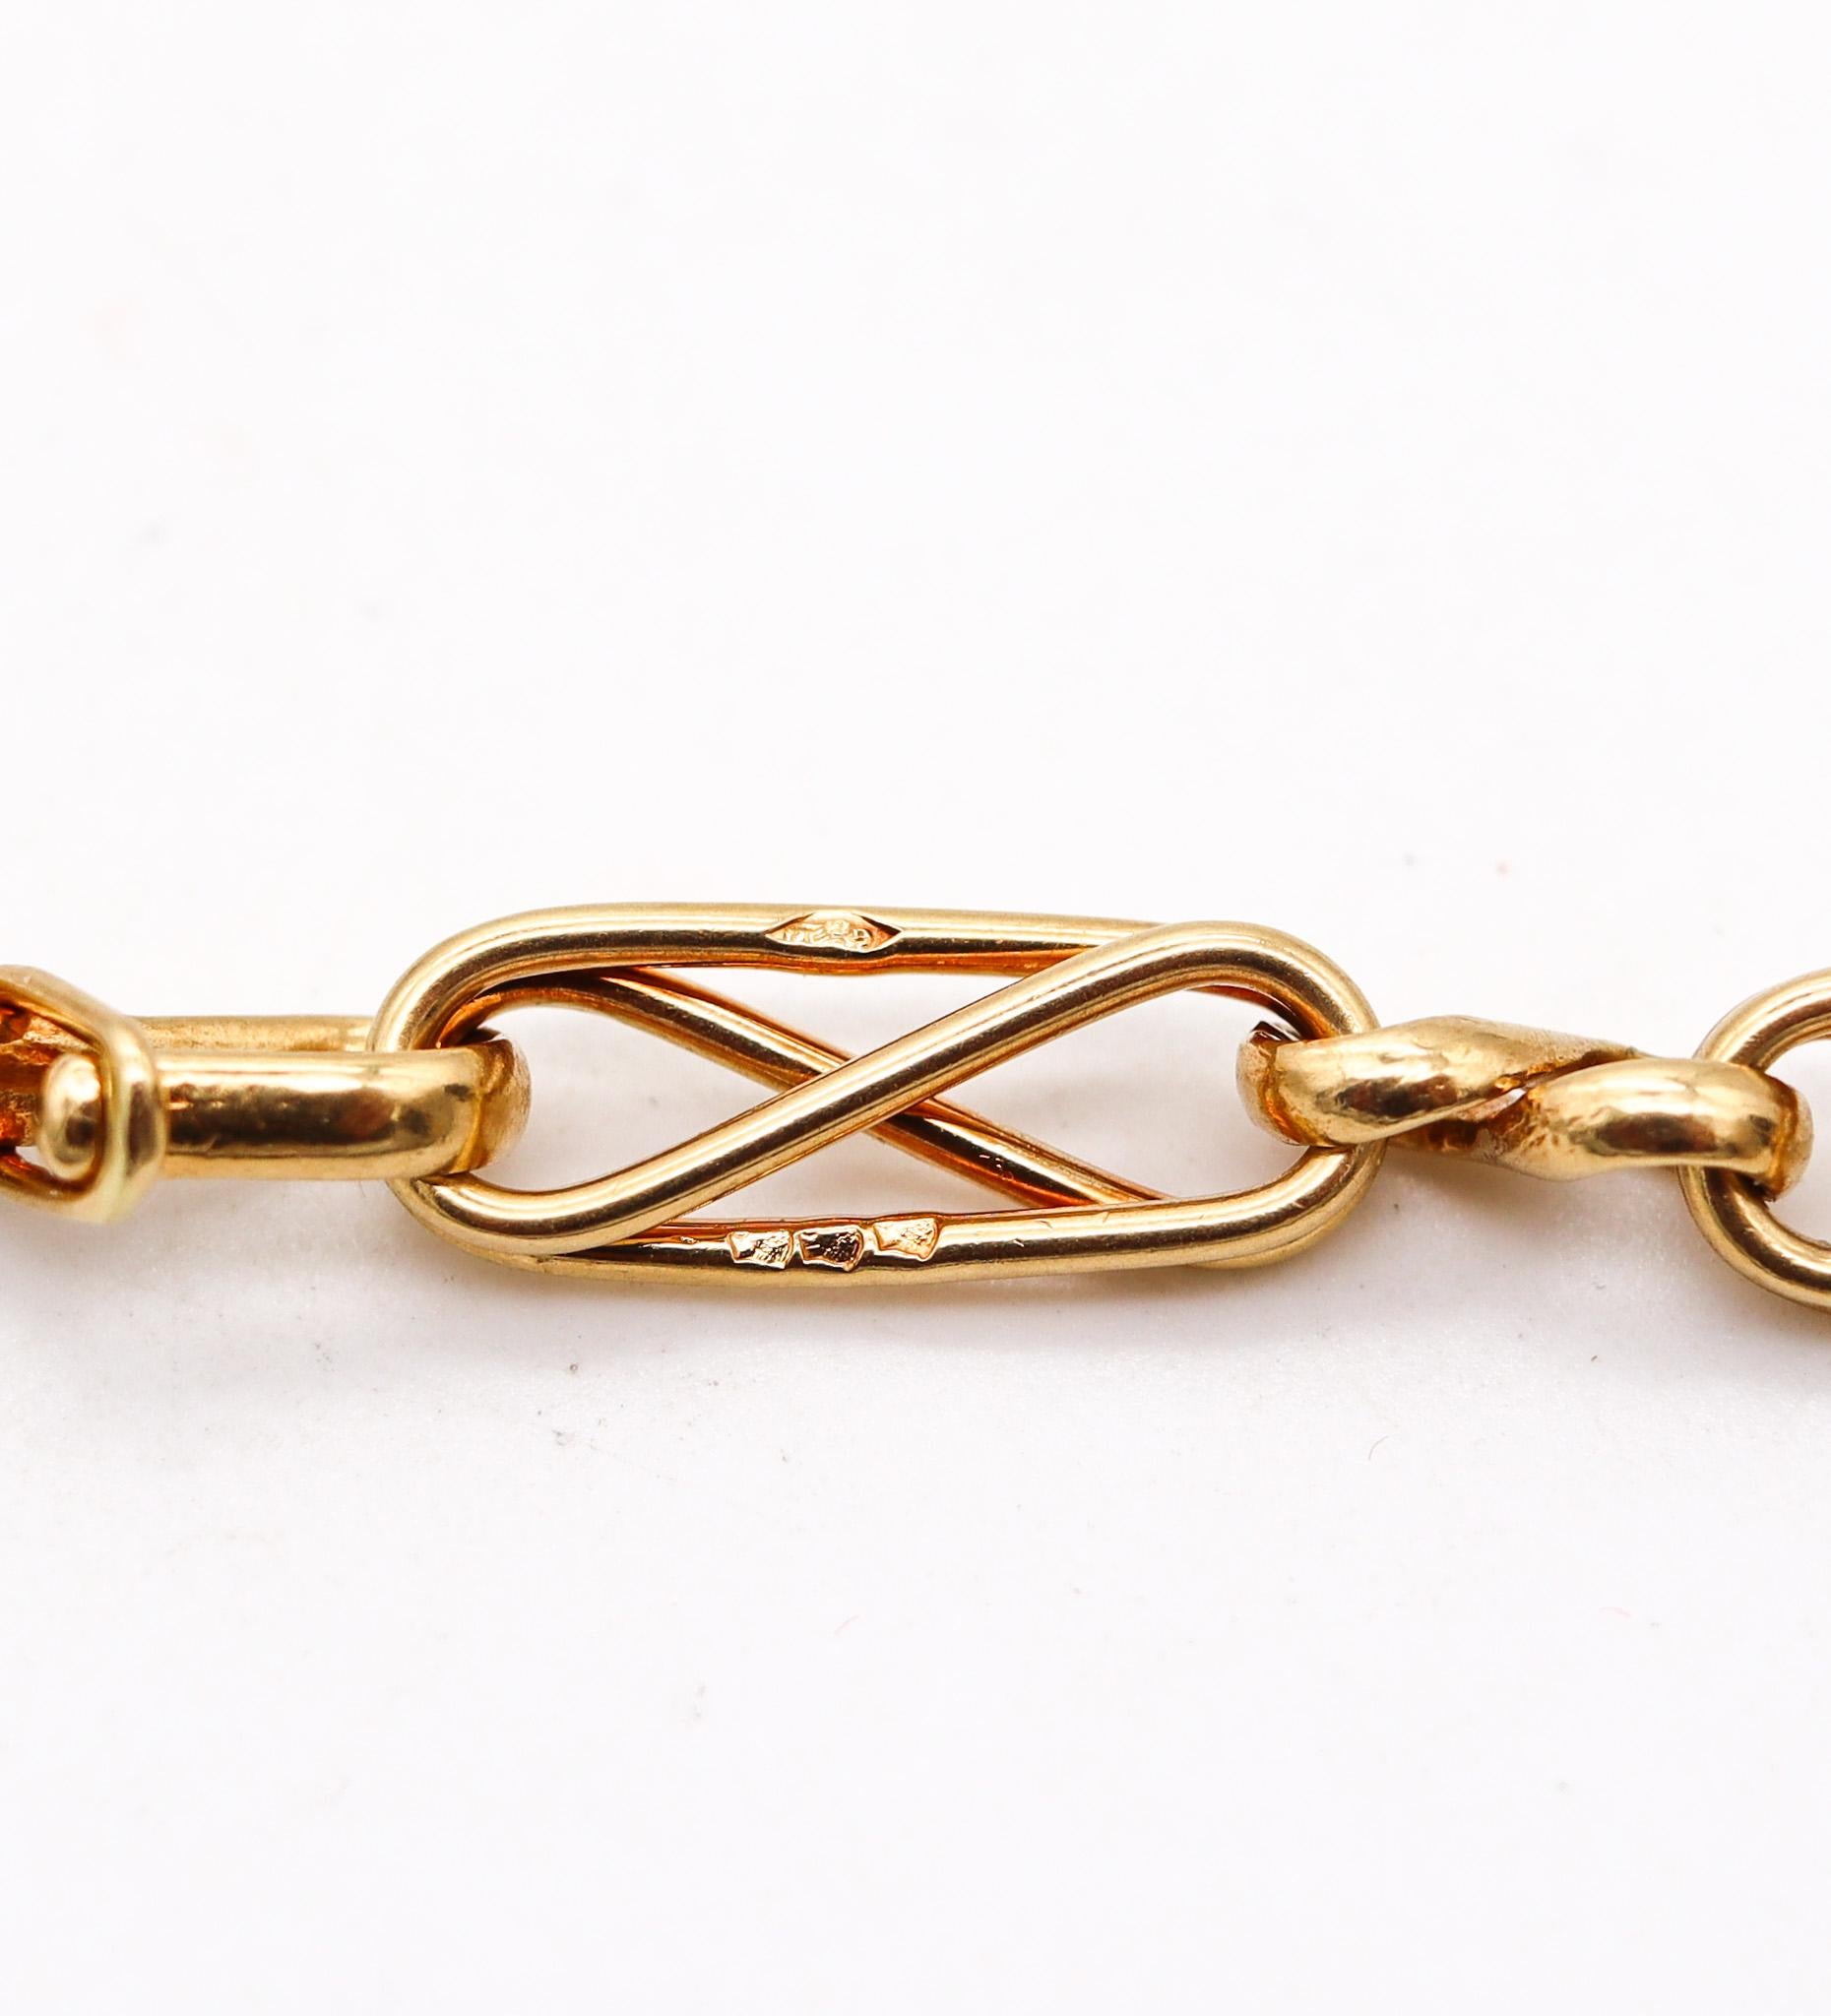 Cartier Paris 1960 George L'enfant Very Rare Geometric Chain in 18Kt Yellow Gold In Excellent Condition For Sale In Miami, FL